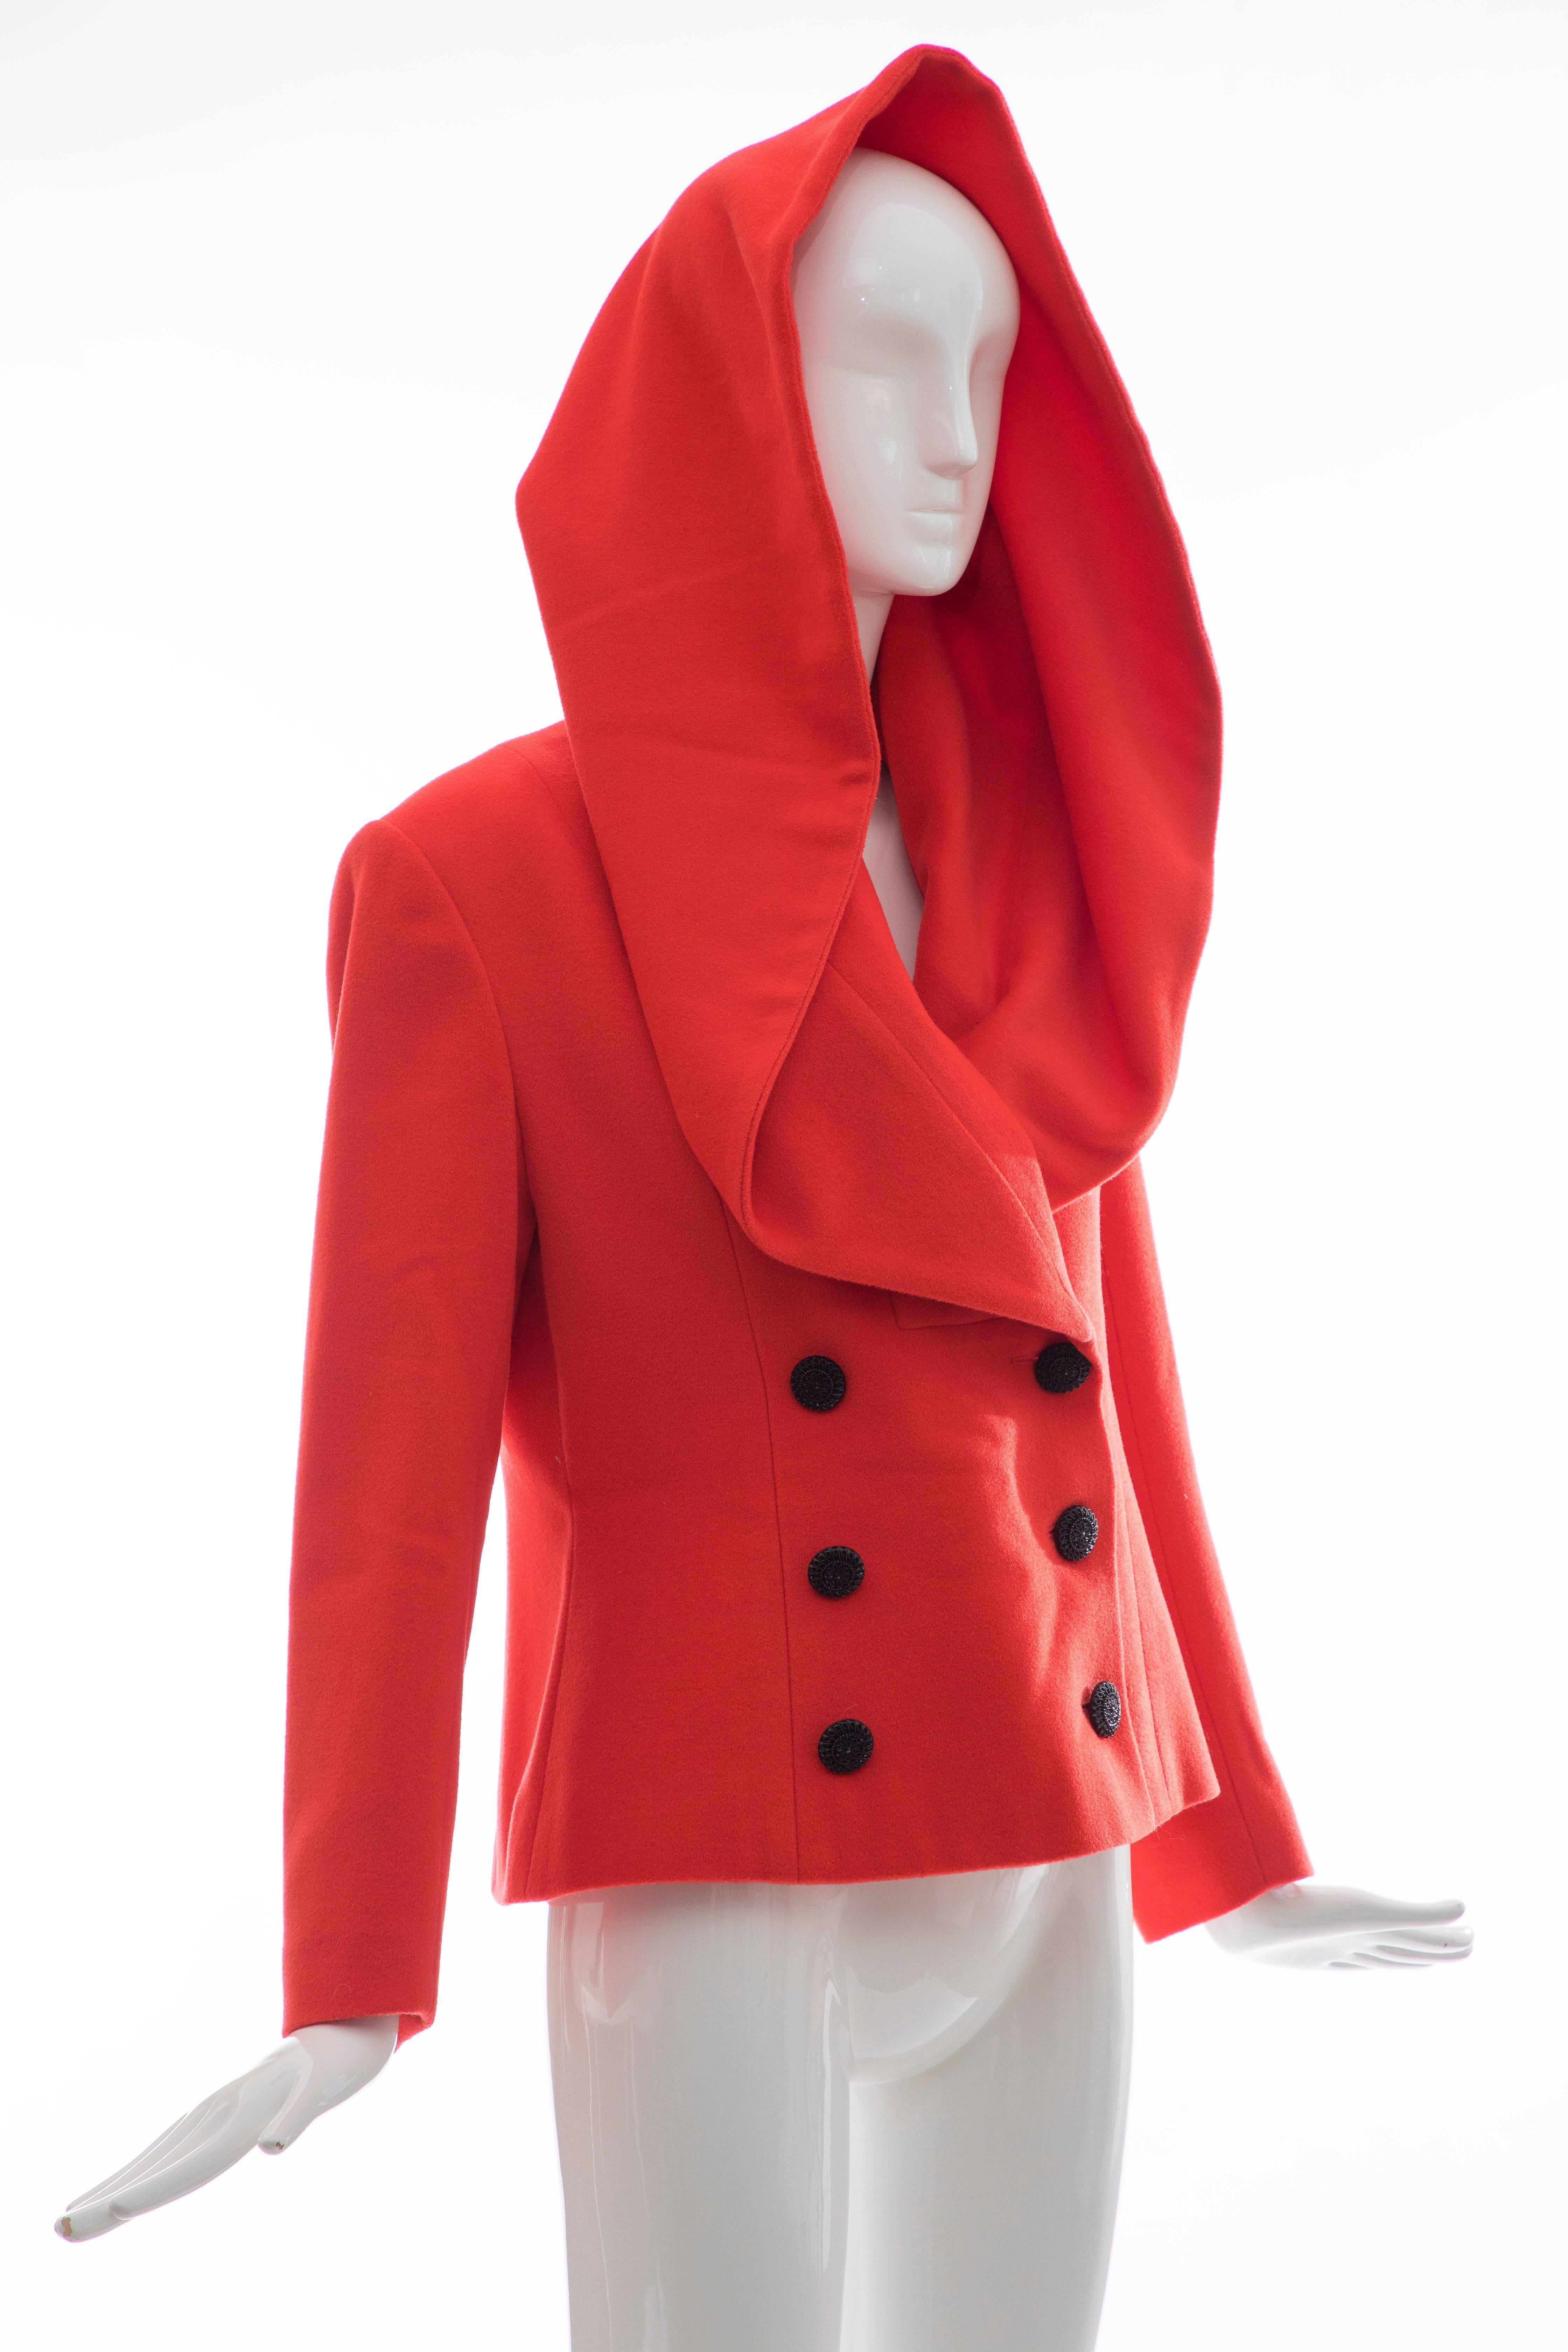 Karl Lagerfeld For Chloe Paprika Wool Shawl Collar Jacket, Circa 1980's For Sale 1